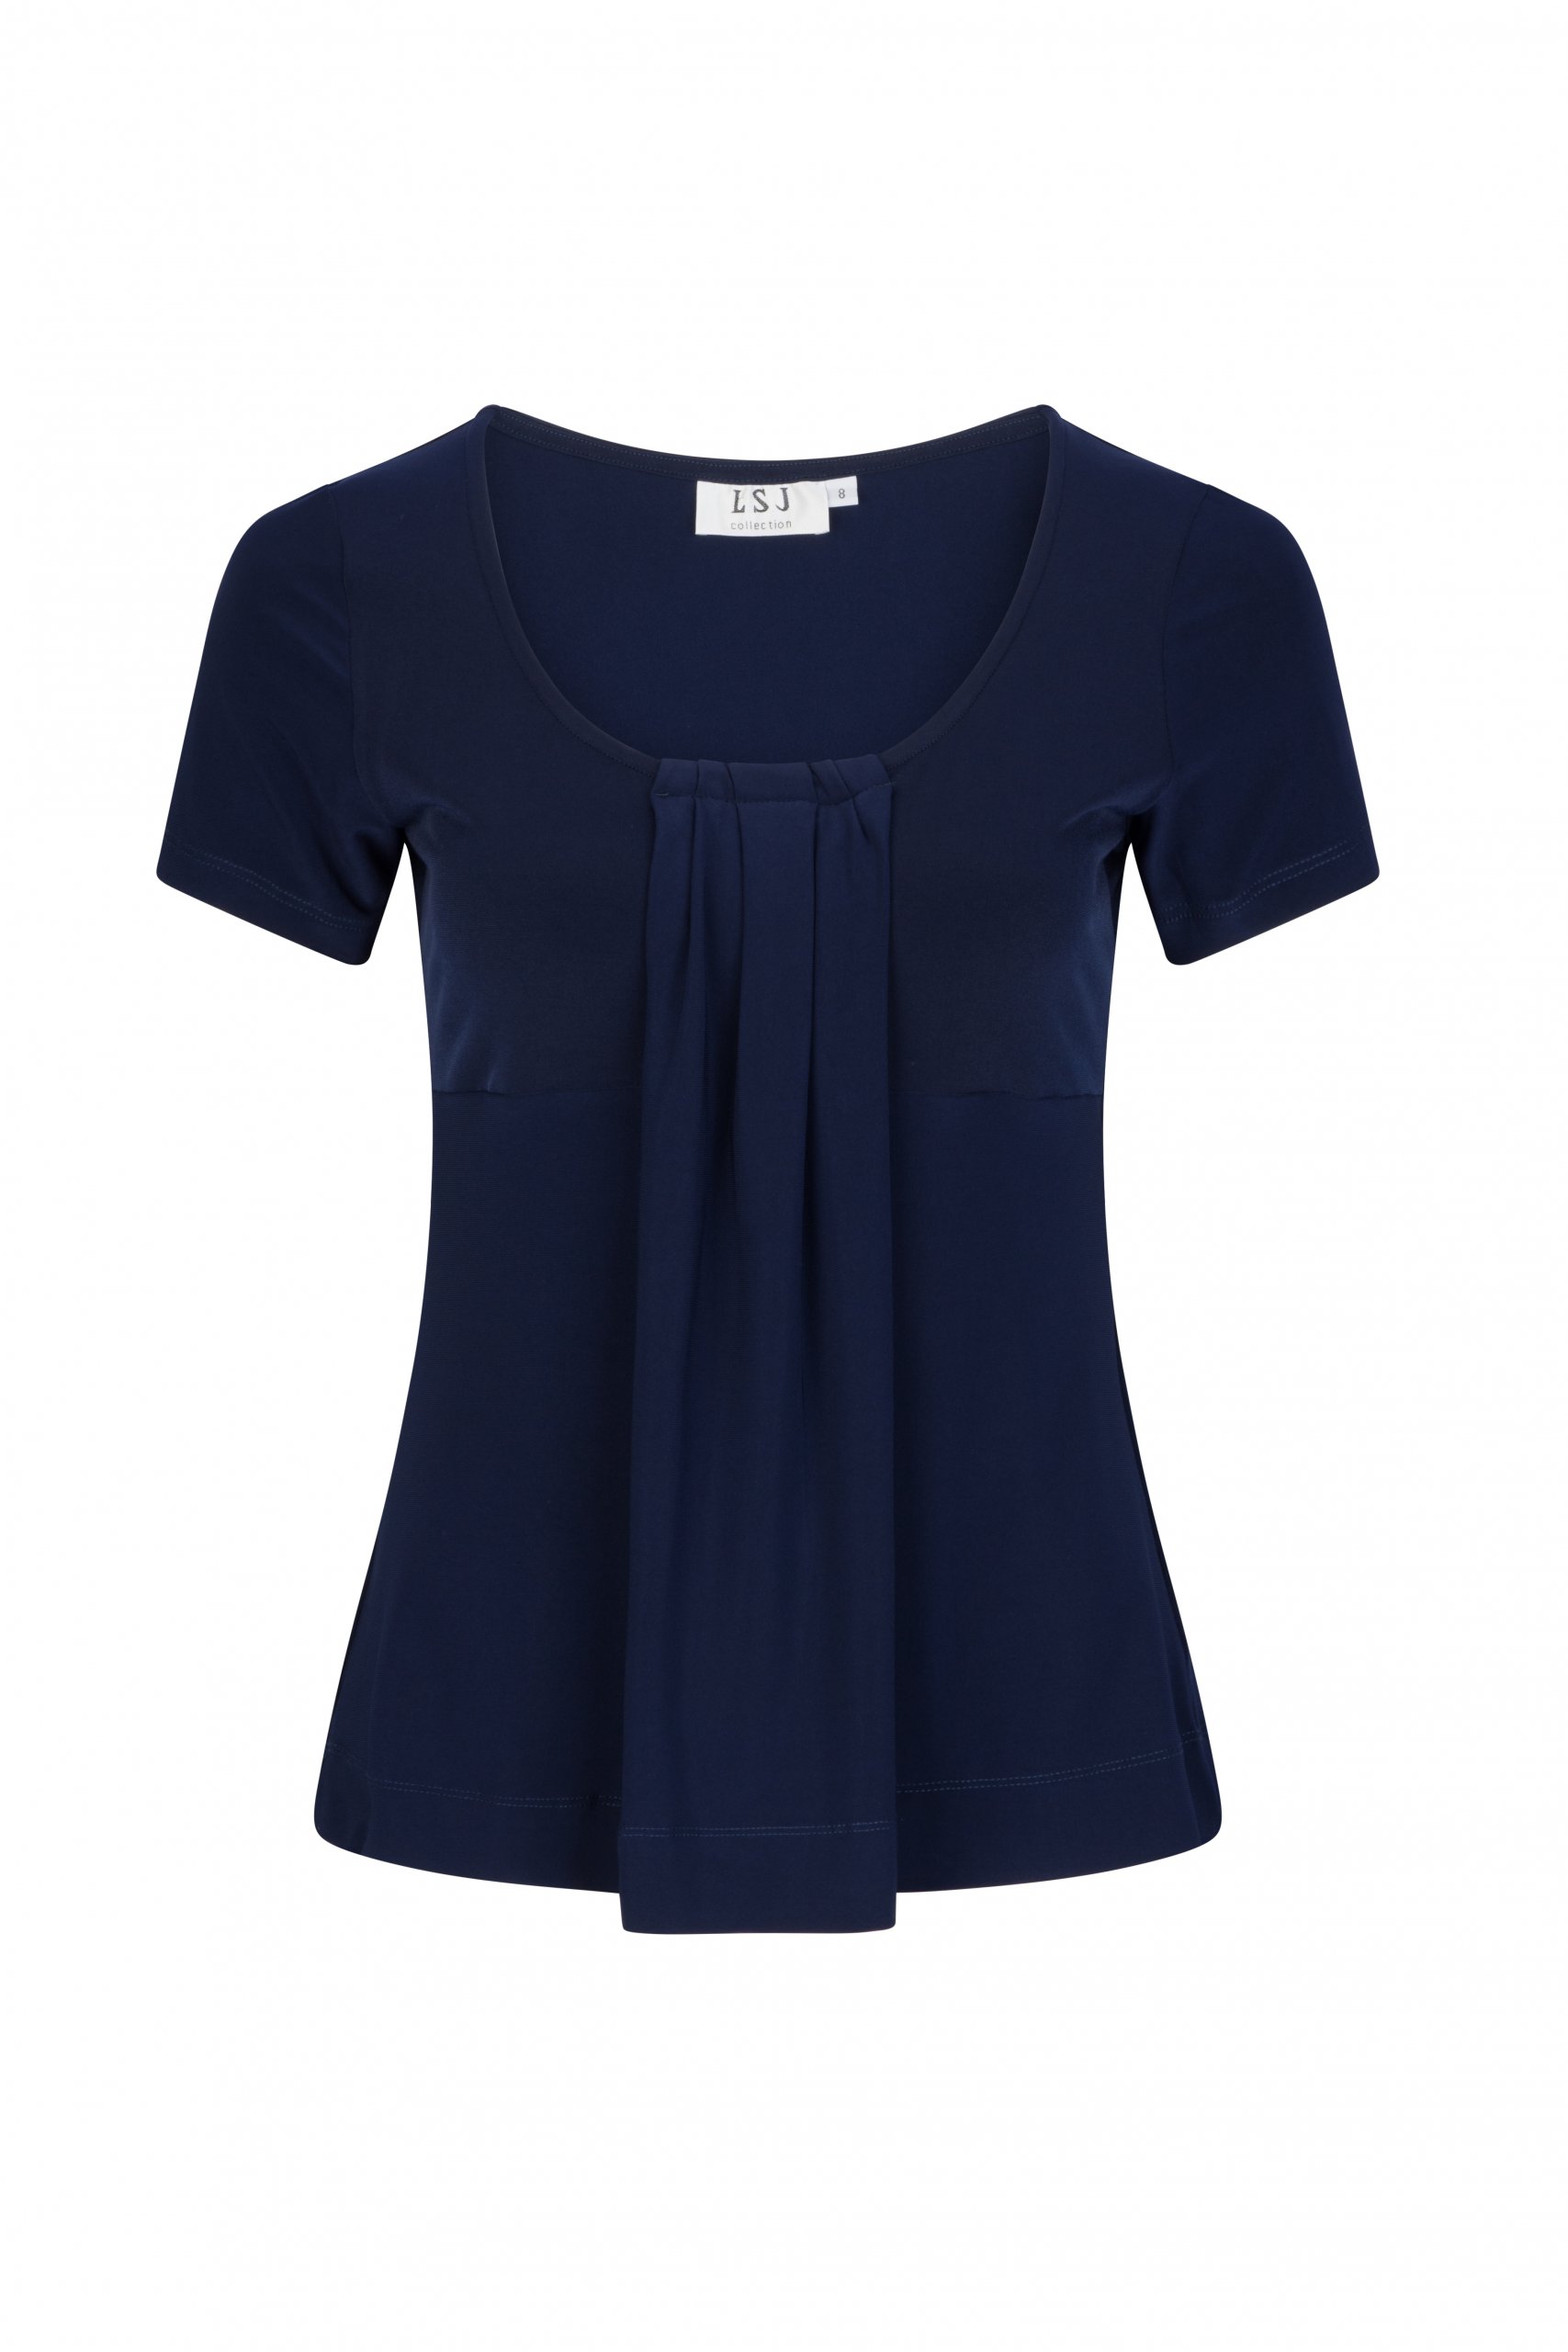 Pleat front top Navy Knit